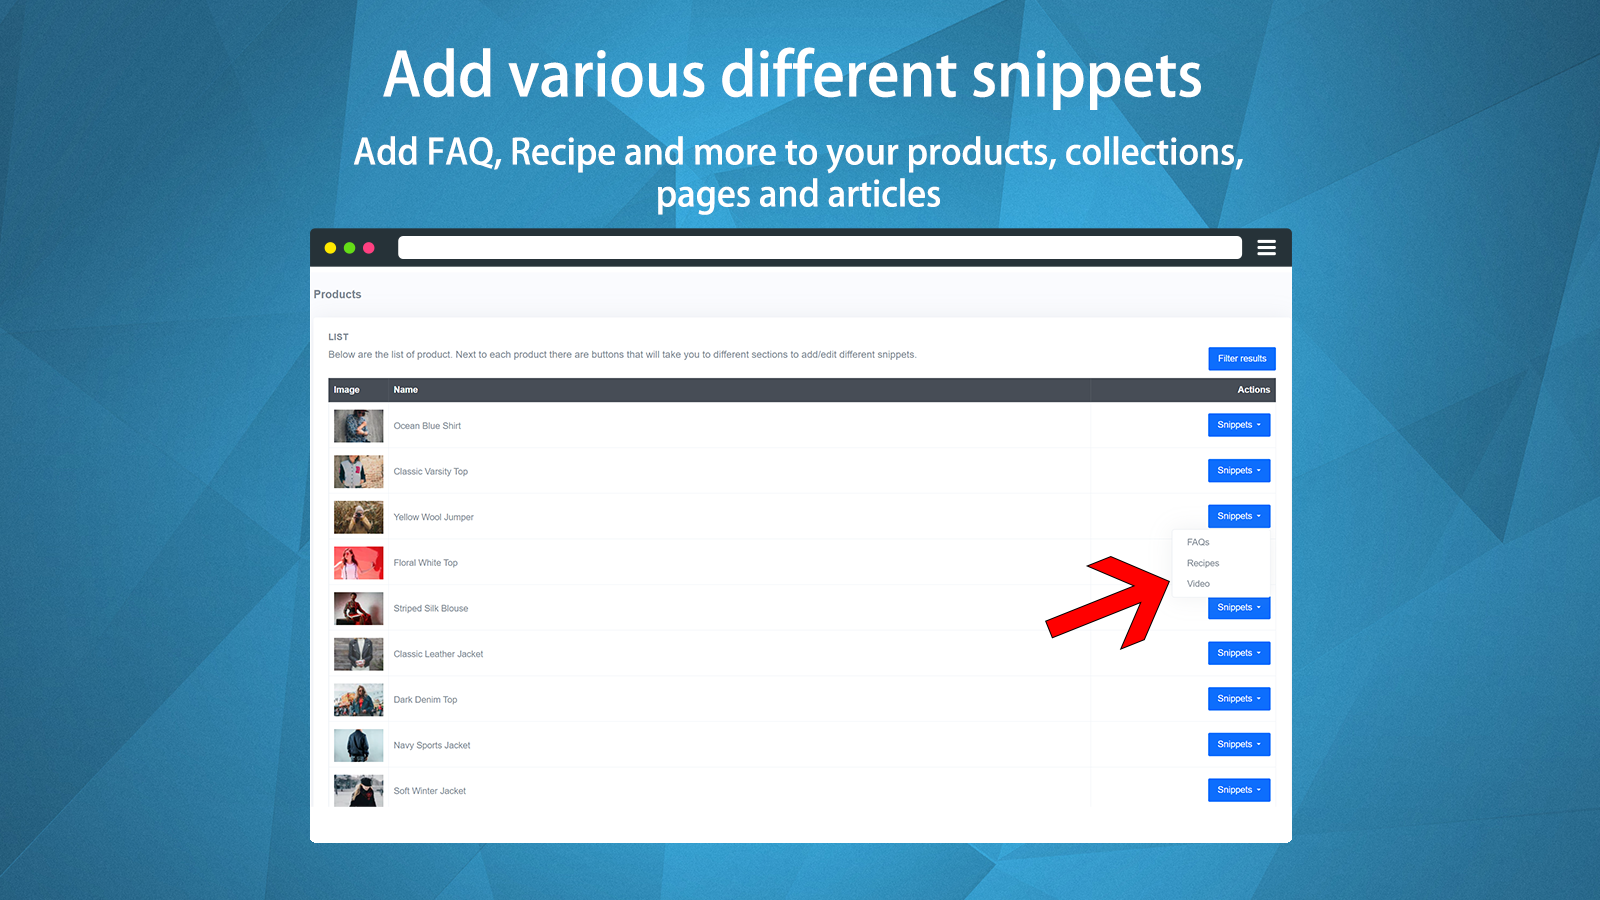 Add different snippets and structured data to your store